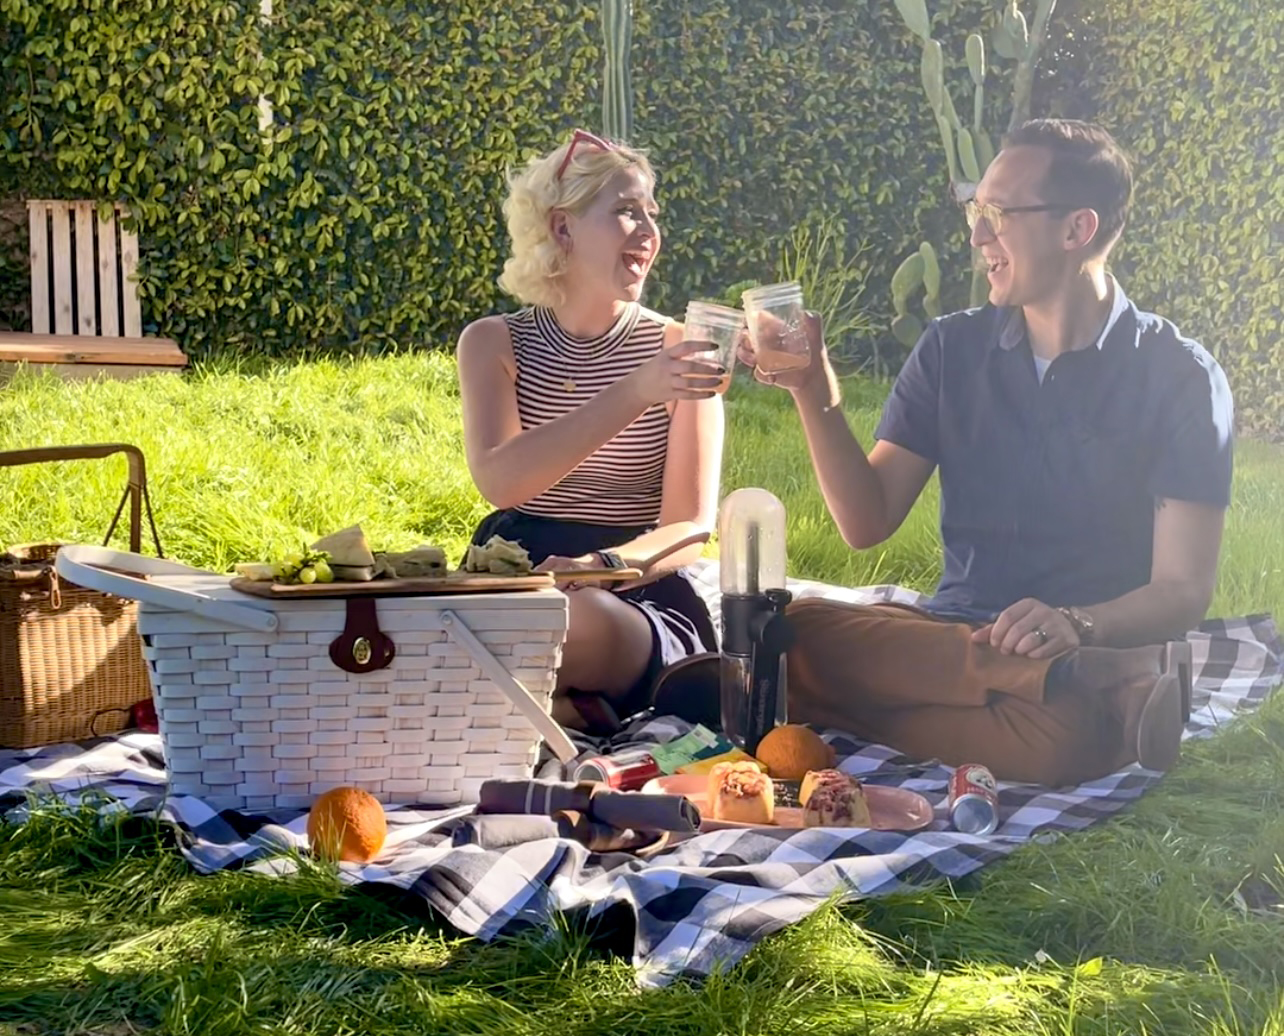 Picnic Cheers with young man and woman